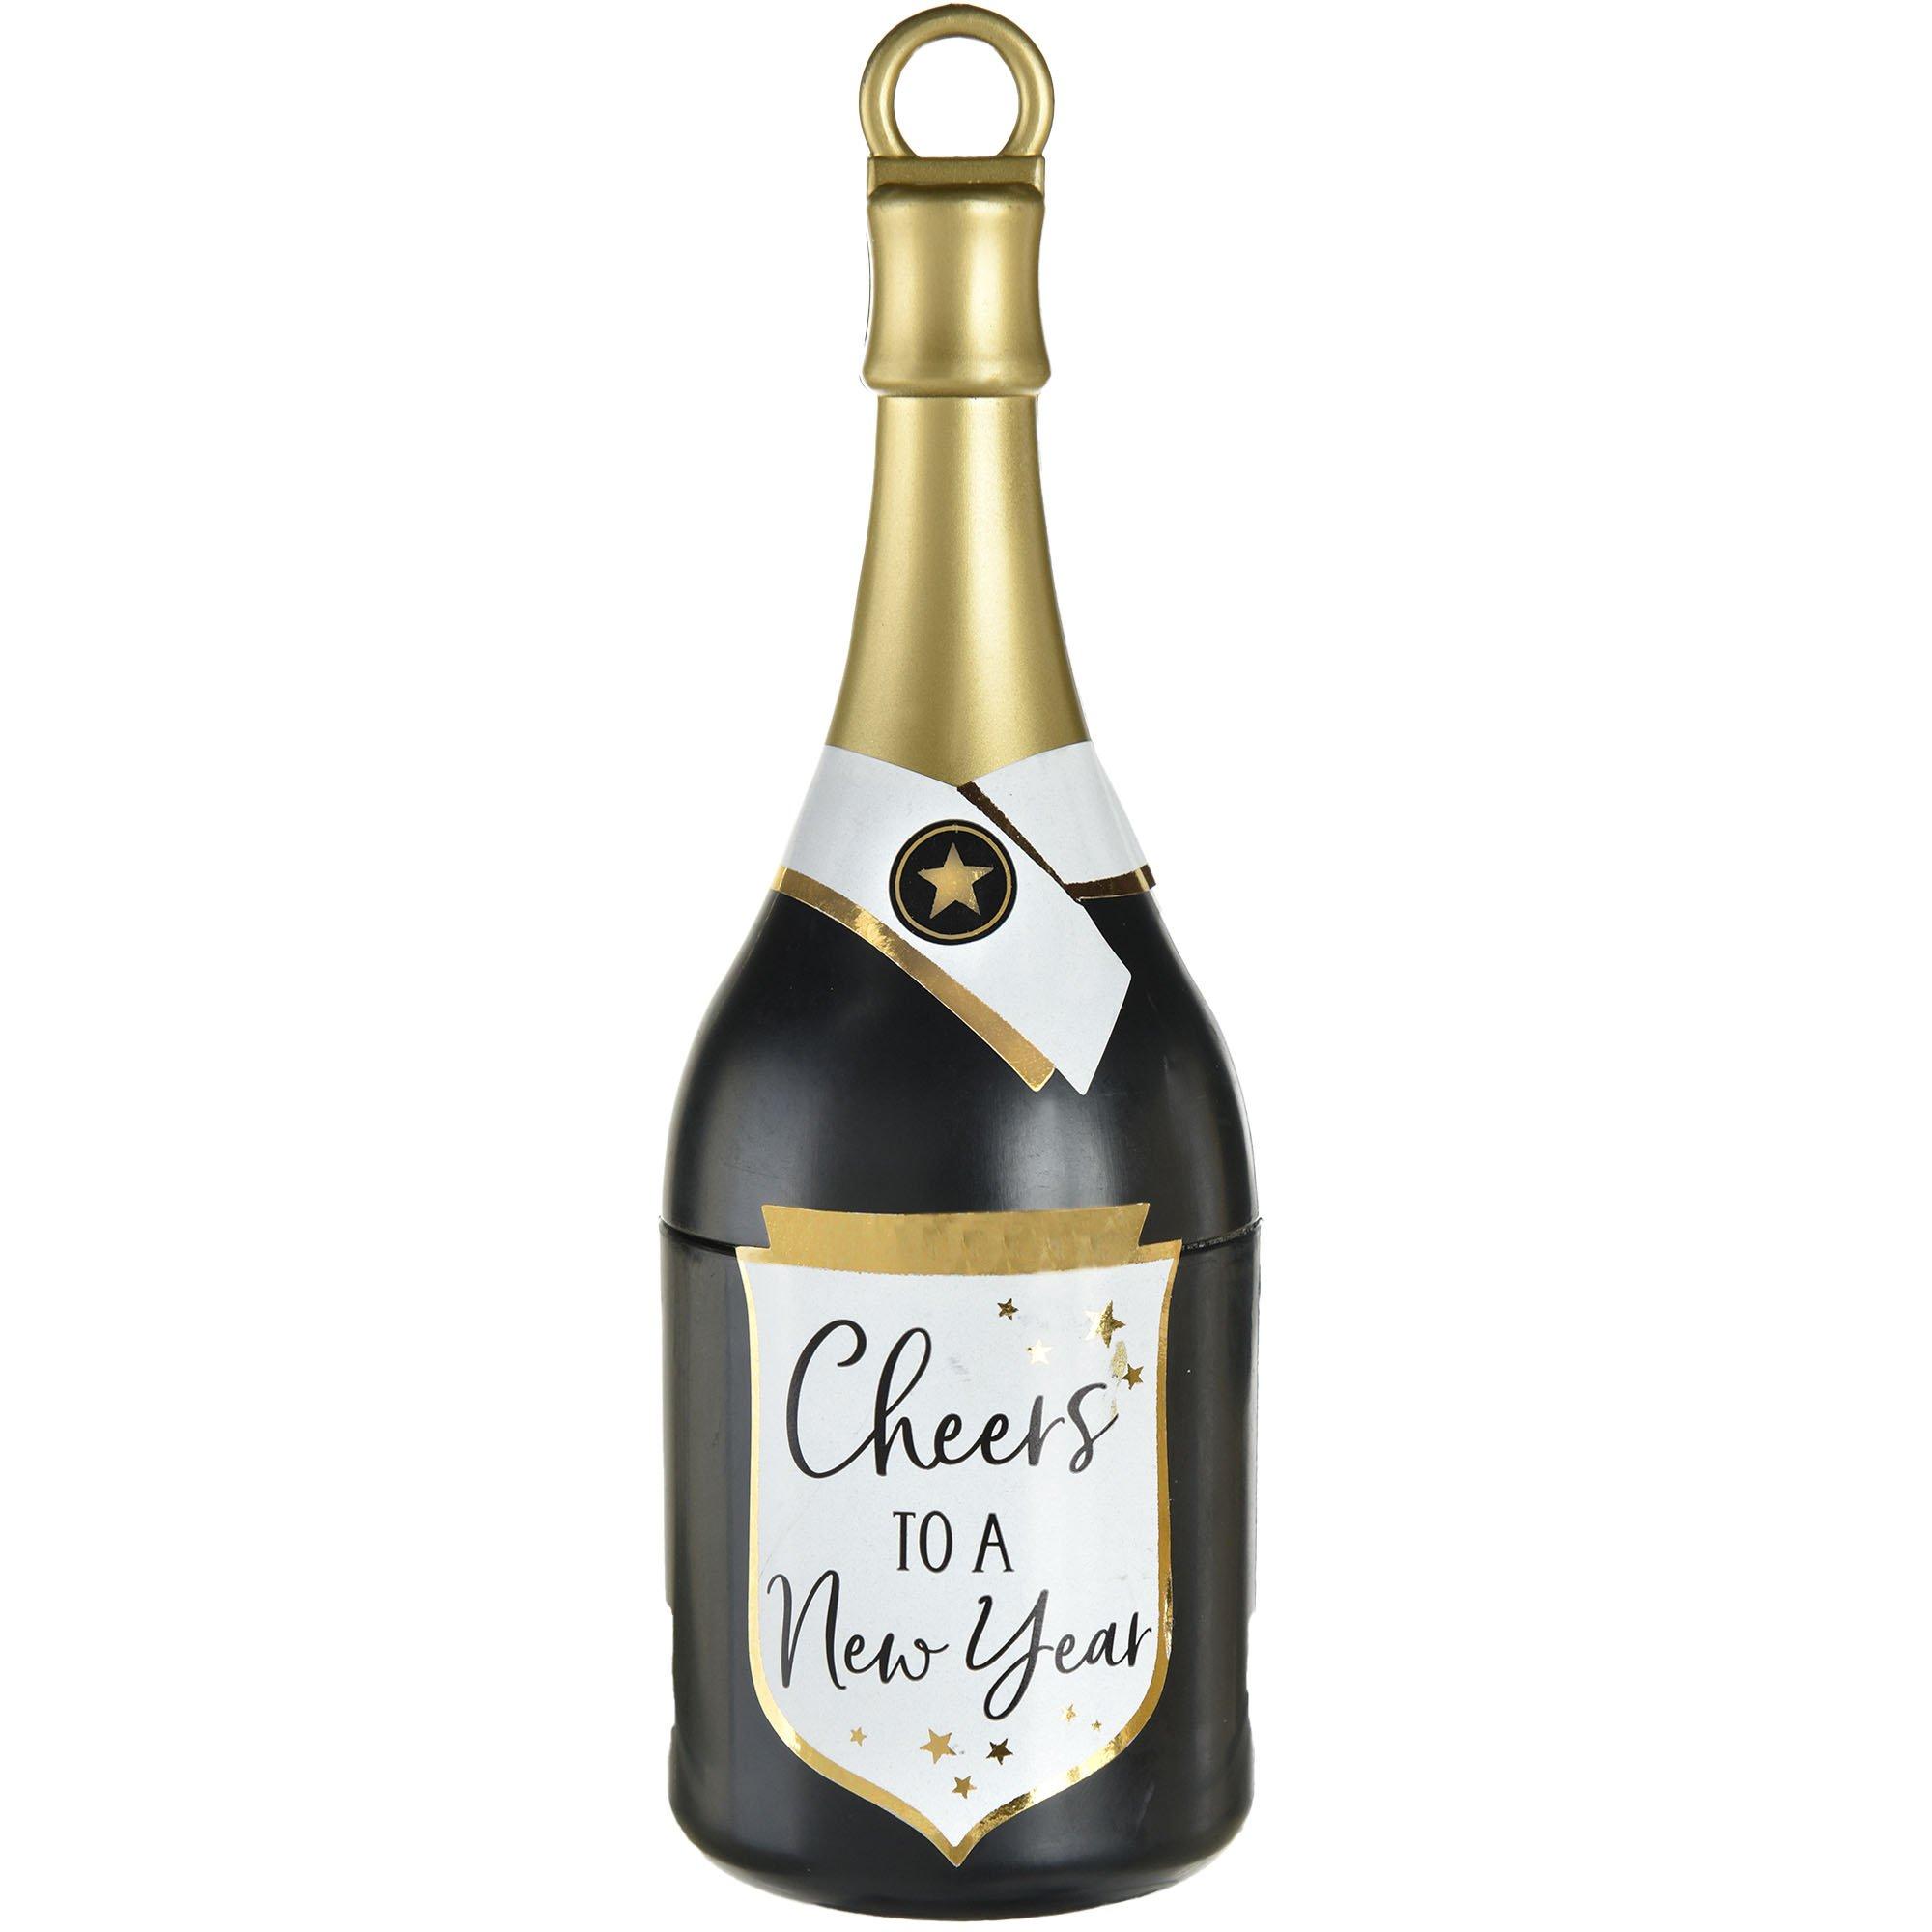 Cheers to a New Year Plastic Champagne Bottle Balloon Weight, 5.6oz